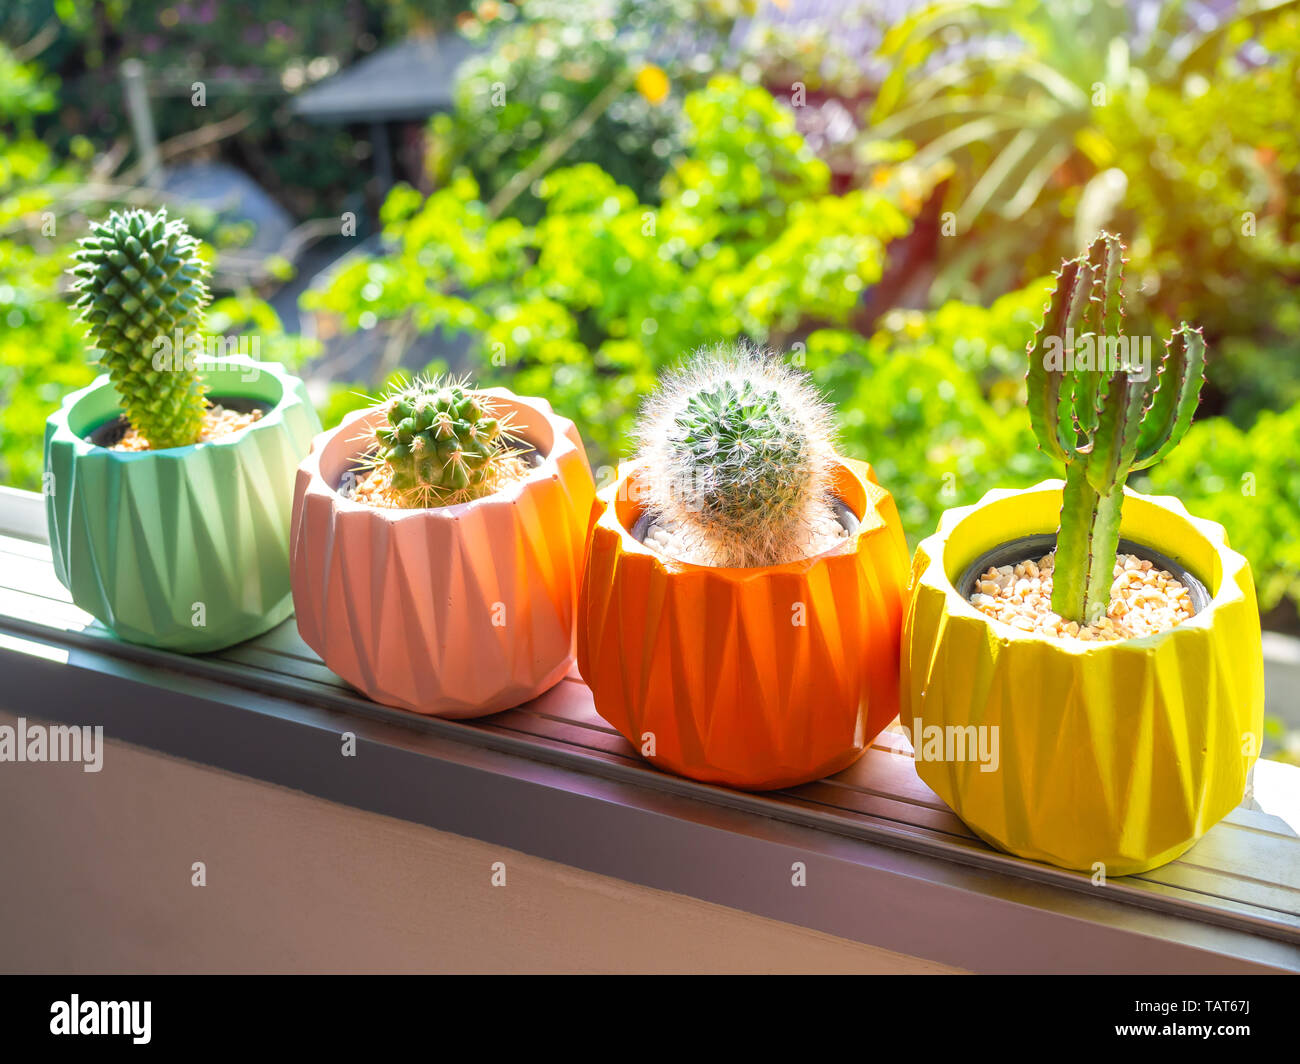 Colorful Painted Geometric Concrete Planters With Cactus Plant On The Window On Green Nature Background Painted Concrete Pots For Home Decoration Stock Photo Alamy,Nail Designs Pictures 2016